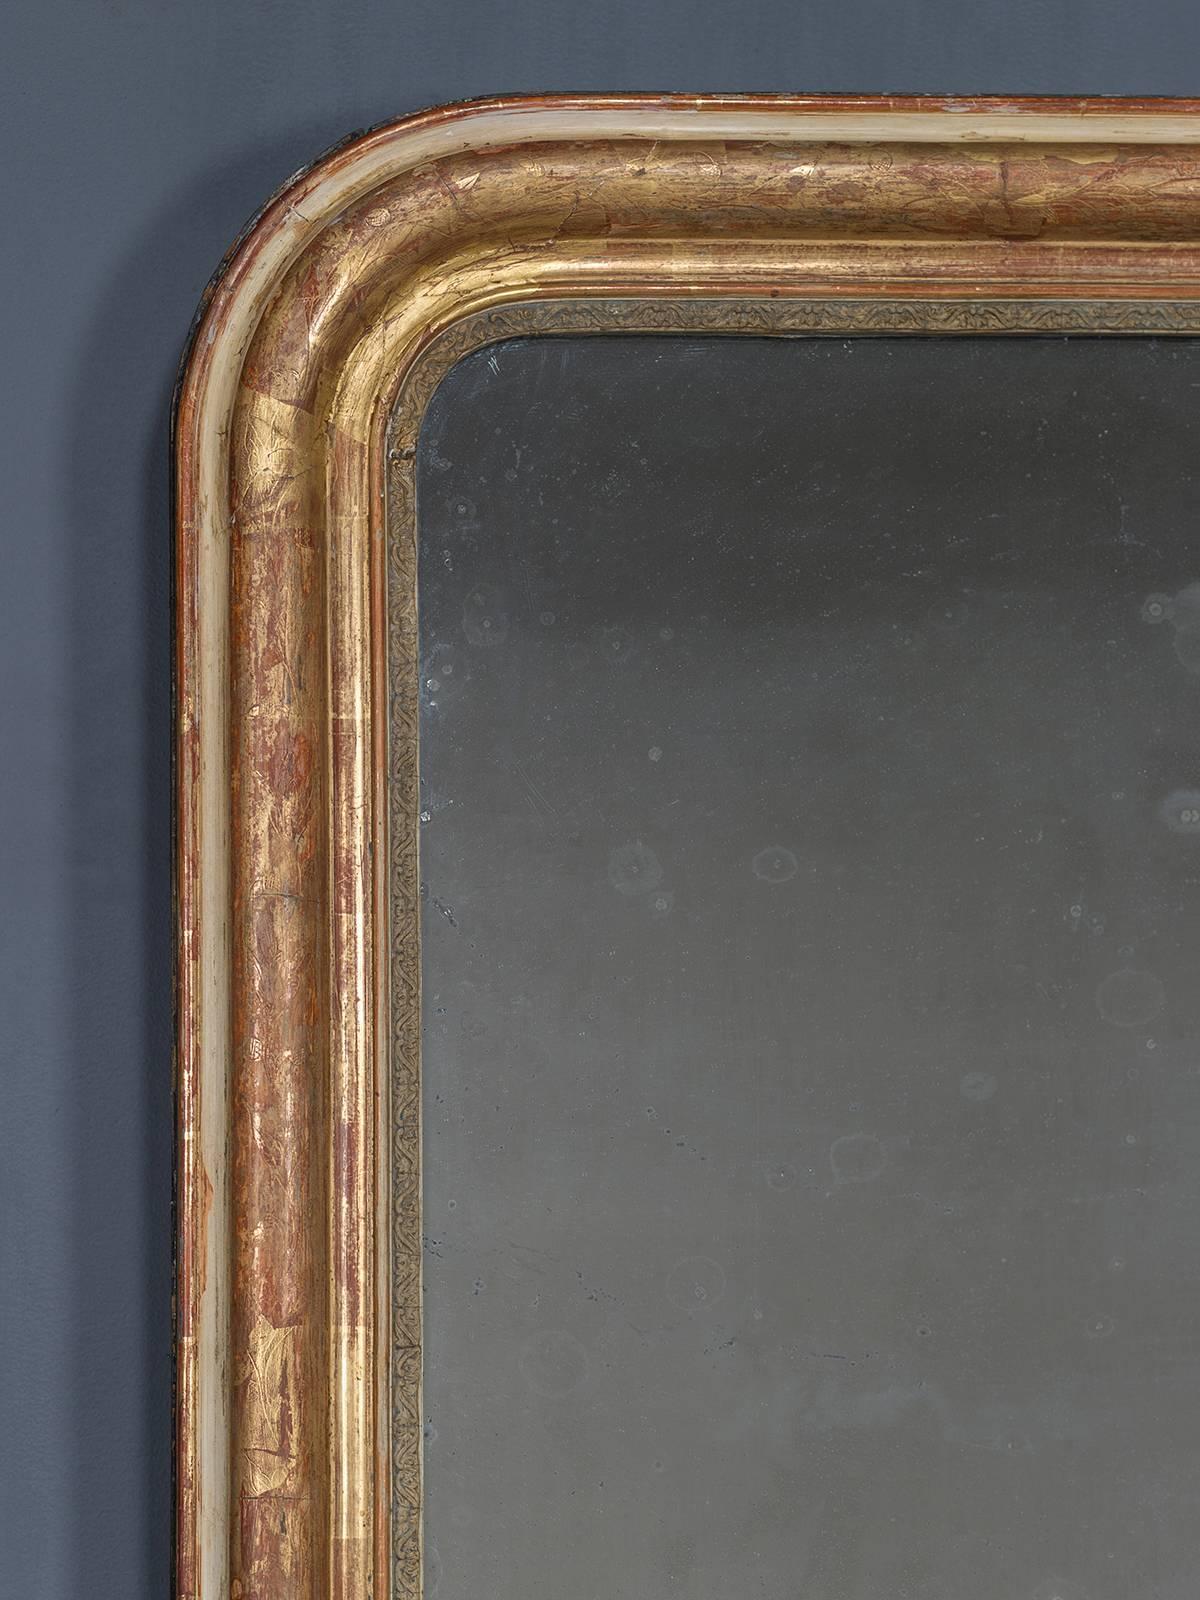 Receive our new selections direct from 1stdibs by email each week. Please click on “Follow Dealer” button below and see them first!

The unusual scale of this antique French Louis Philippe mirror circa 1885 gives it a unique ability to be placed